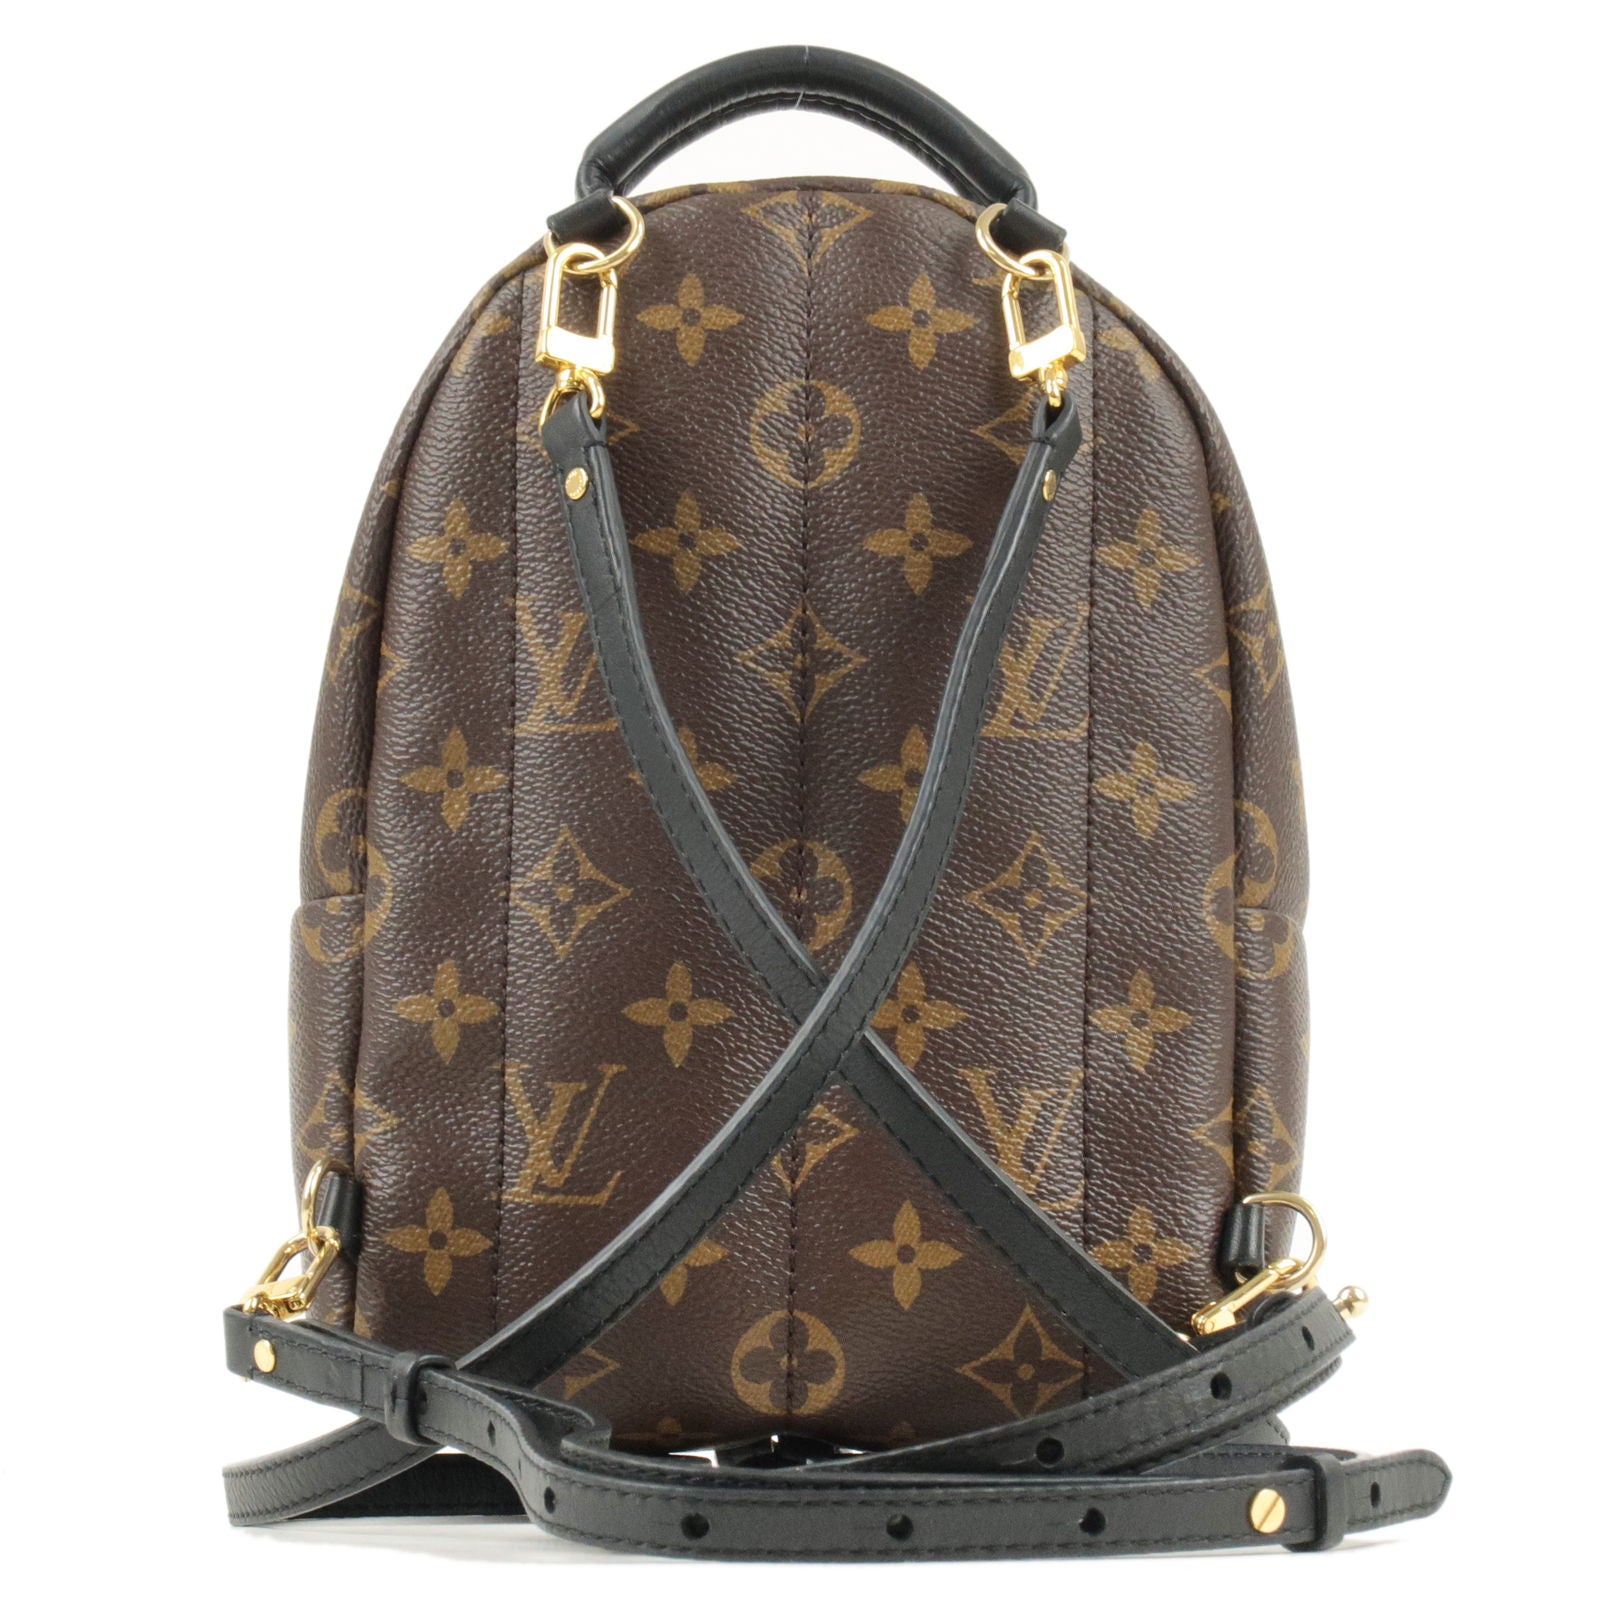 Buy Louis Vuitton Palm Springs Mini Backpack M41562 at